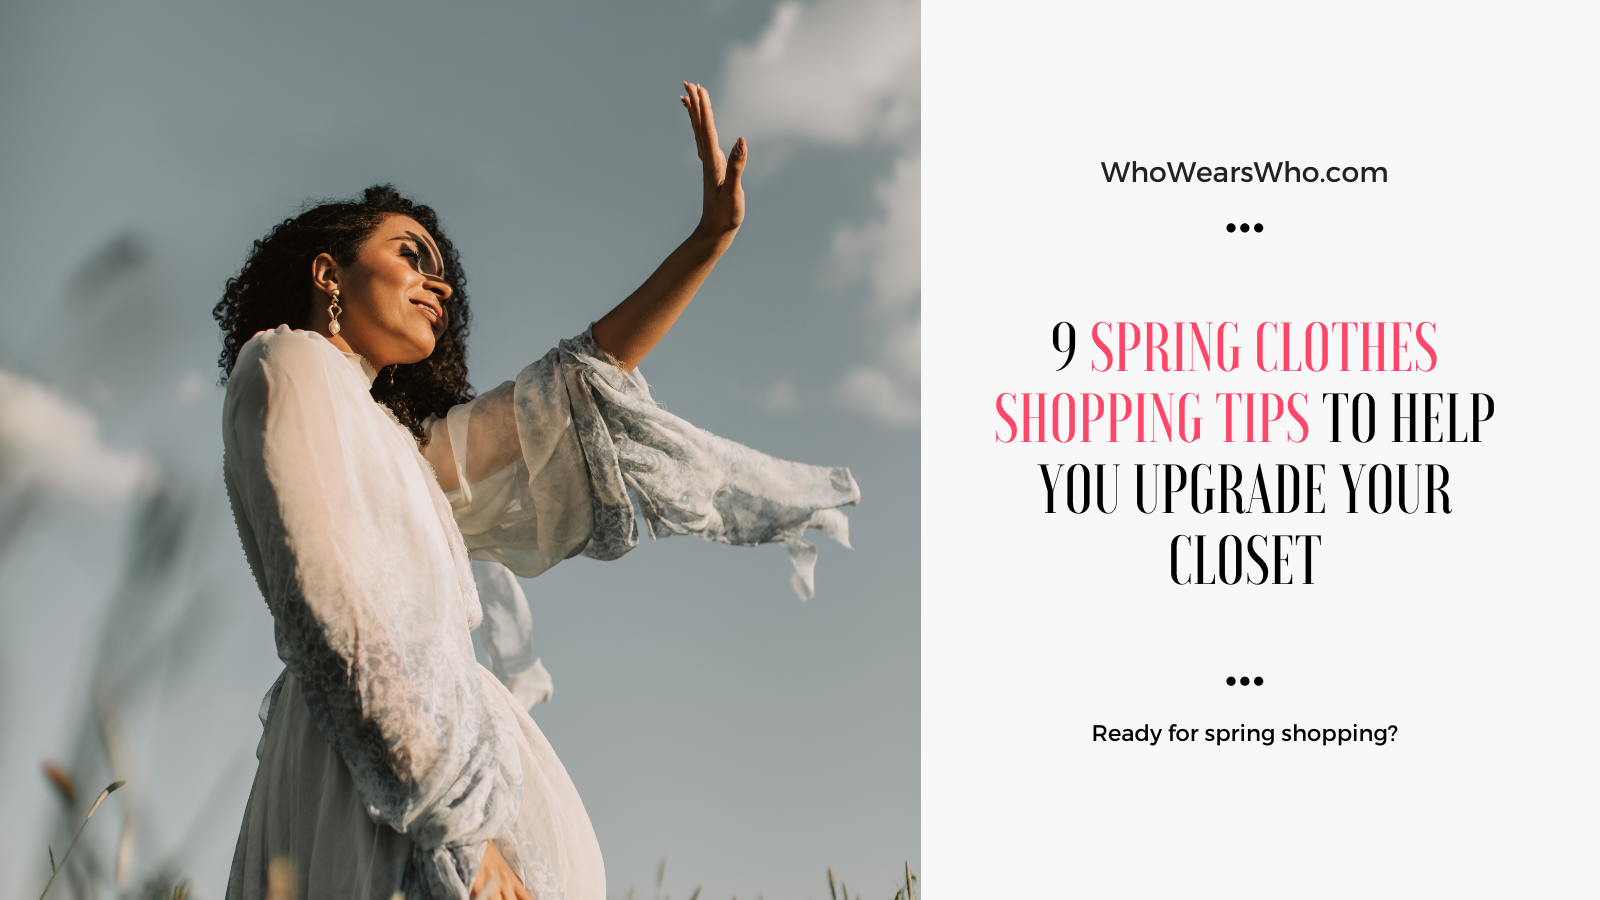 9 Spring Clothes Shopping Tips to Help You Upgrade Your Closet Twitter